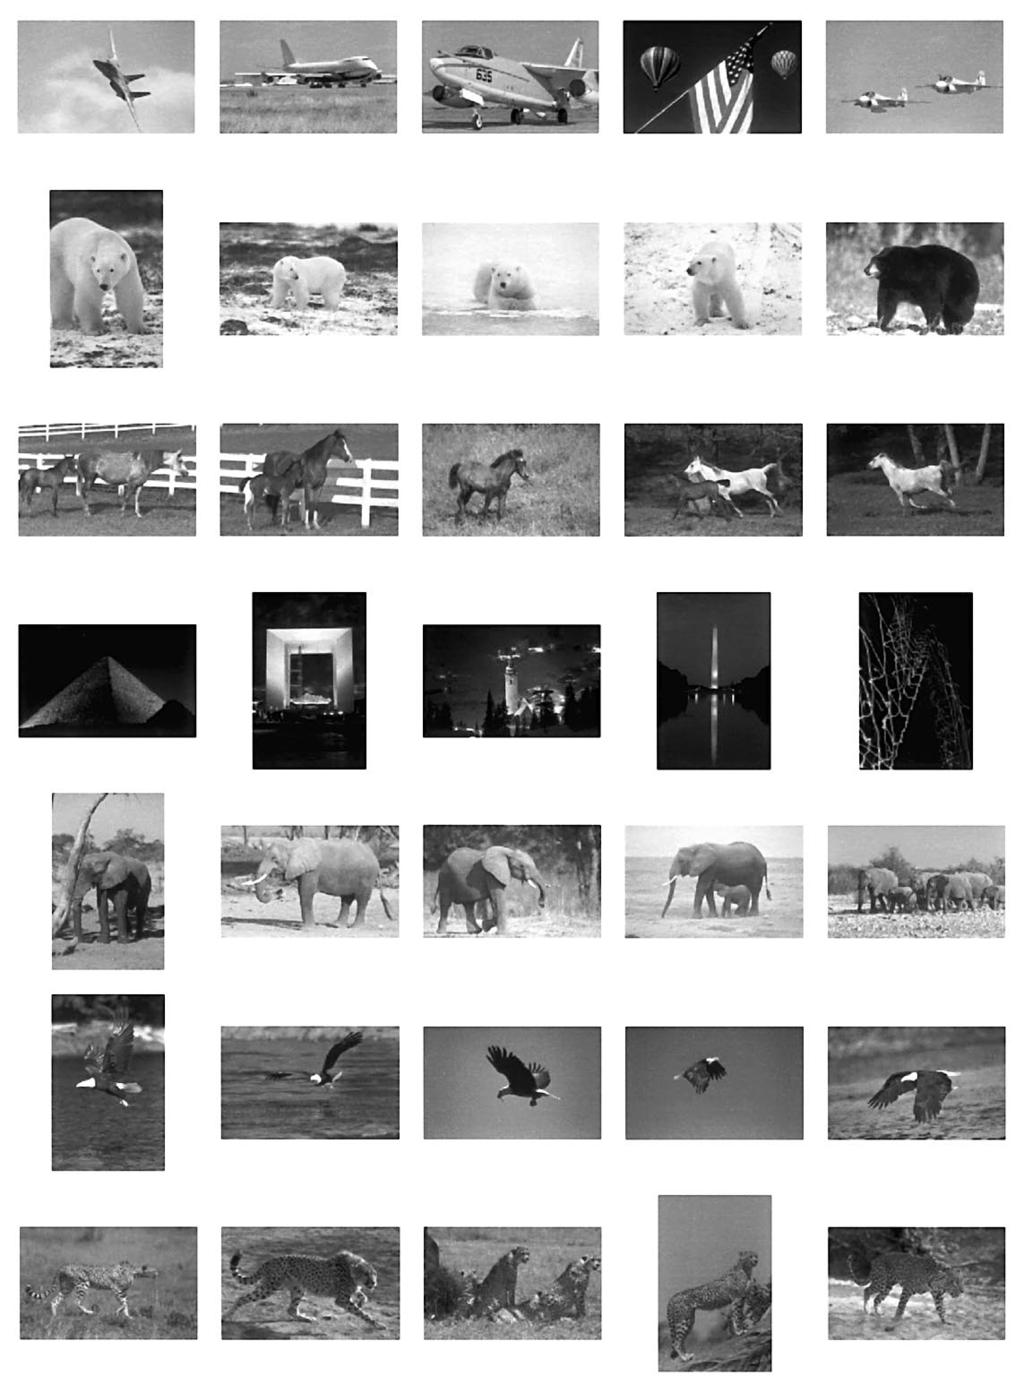 Application: Histogram-based Image Classification Multiclass: air shows, bears, Arabian horses, night scenes, and several 1058 more classes not shown